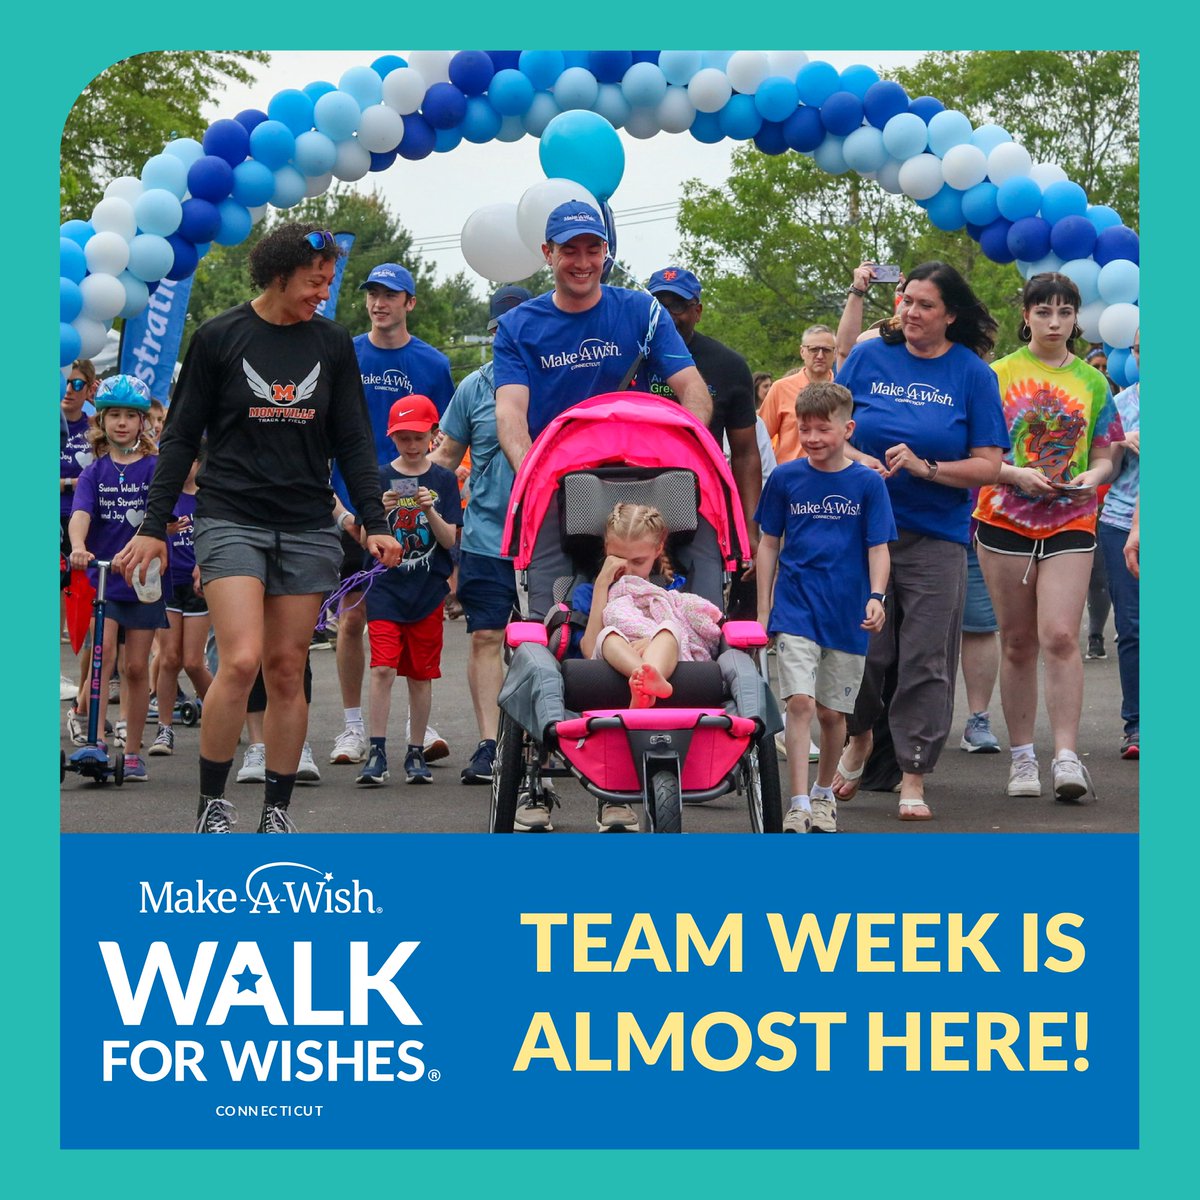 Mark your calendars 🗓️ NEXT WEEK is Team Week! You and your teammates can win some great rewards for your fundraising efforts — so keep an eye out for the prizes! Register now at ct.wish.org/walk 👟⭐️ #walkforwishes #makeawishct #makeawish #fundraiser #nonprofit